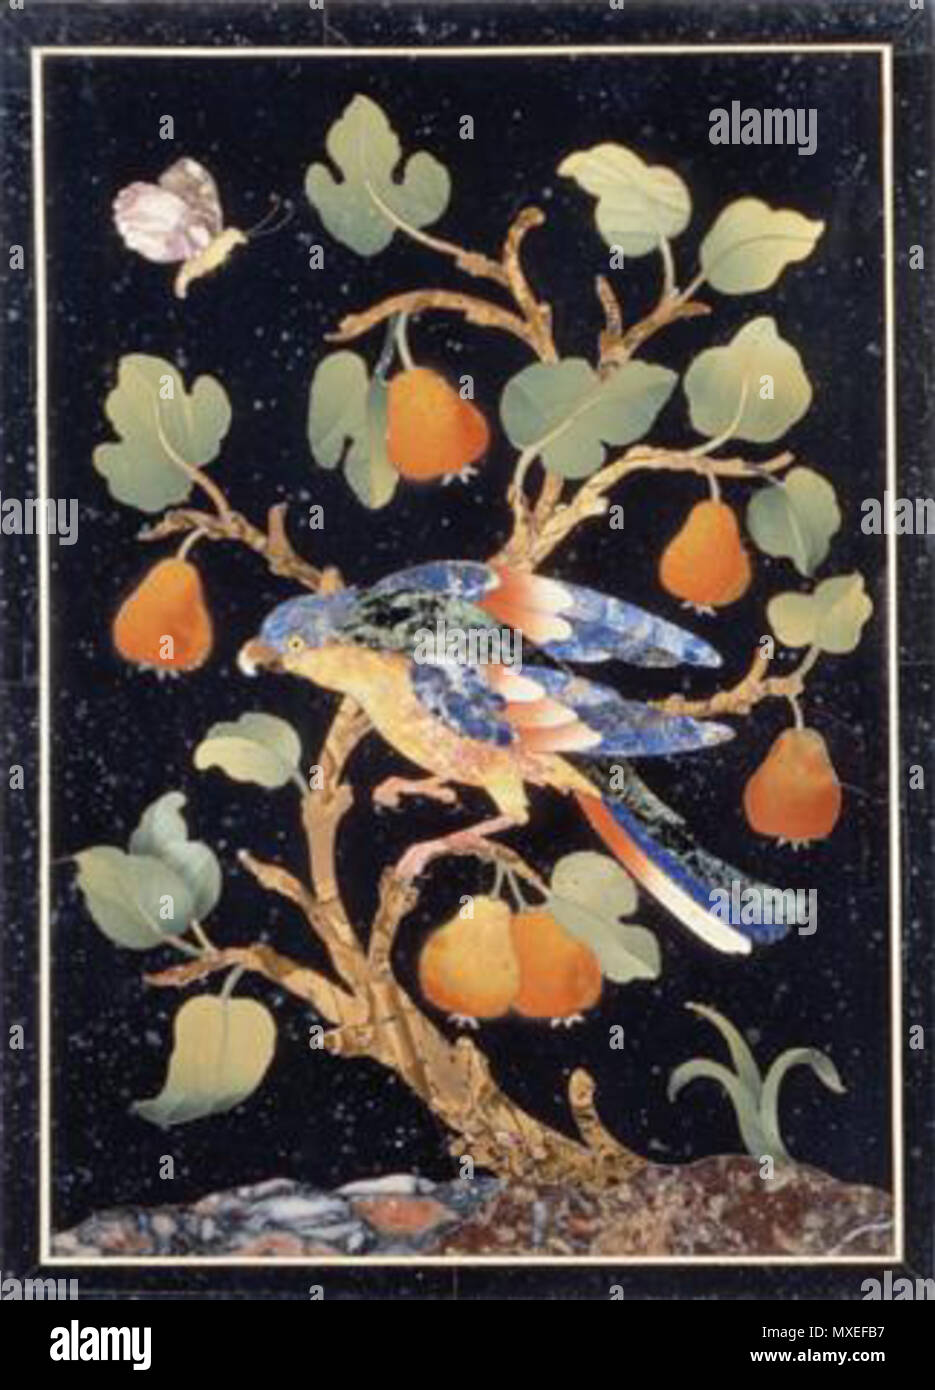 . Panel with a Parrot on a Pear Tree, The XVIIth century. Workshops of the Grand Duke of Tuscany. Florence, Museo dell'Opificio delle Pietre Dure. Mosaic . XVIIth century.. Workshops of the Grand Duke of Tuscany. 466 Panel with a Parrot on a Pear Tree (pietre dure, 17 c.) Stock Photo